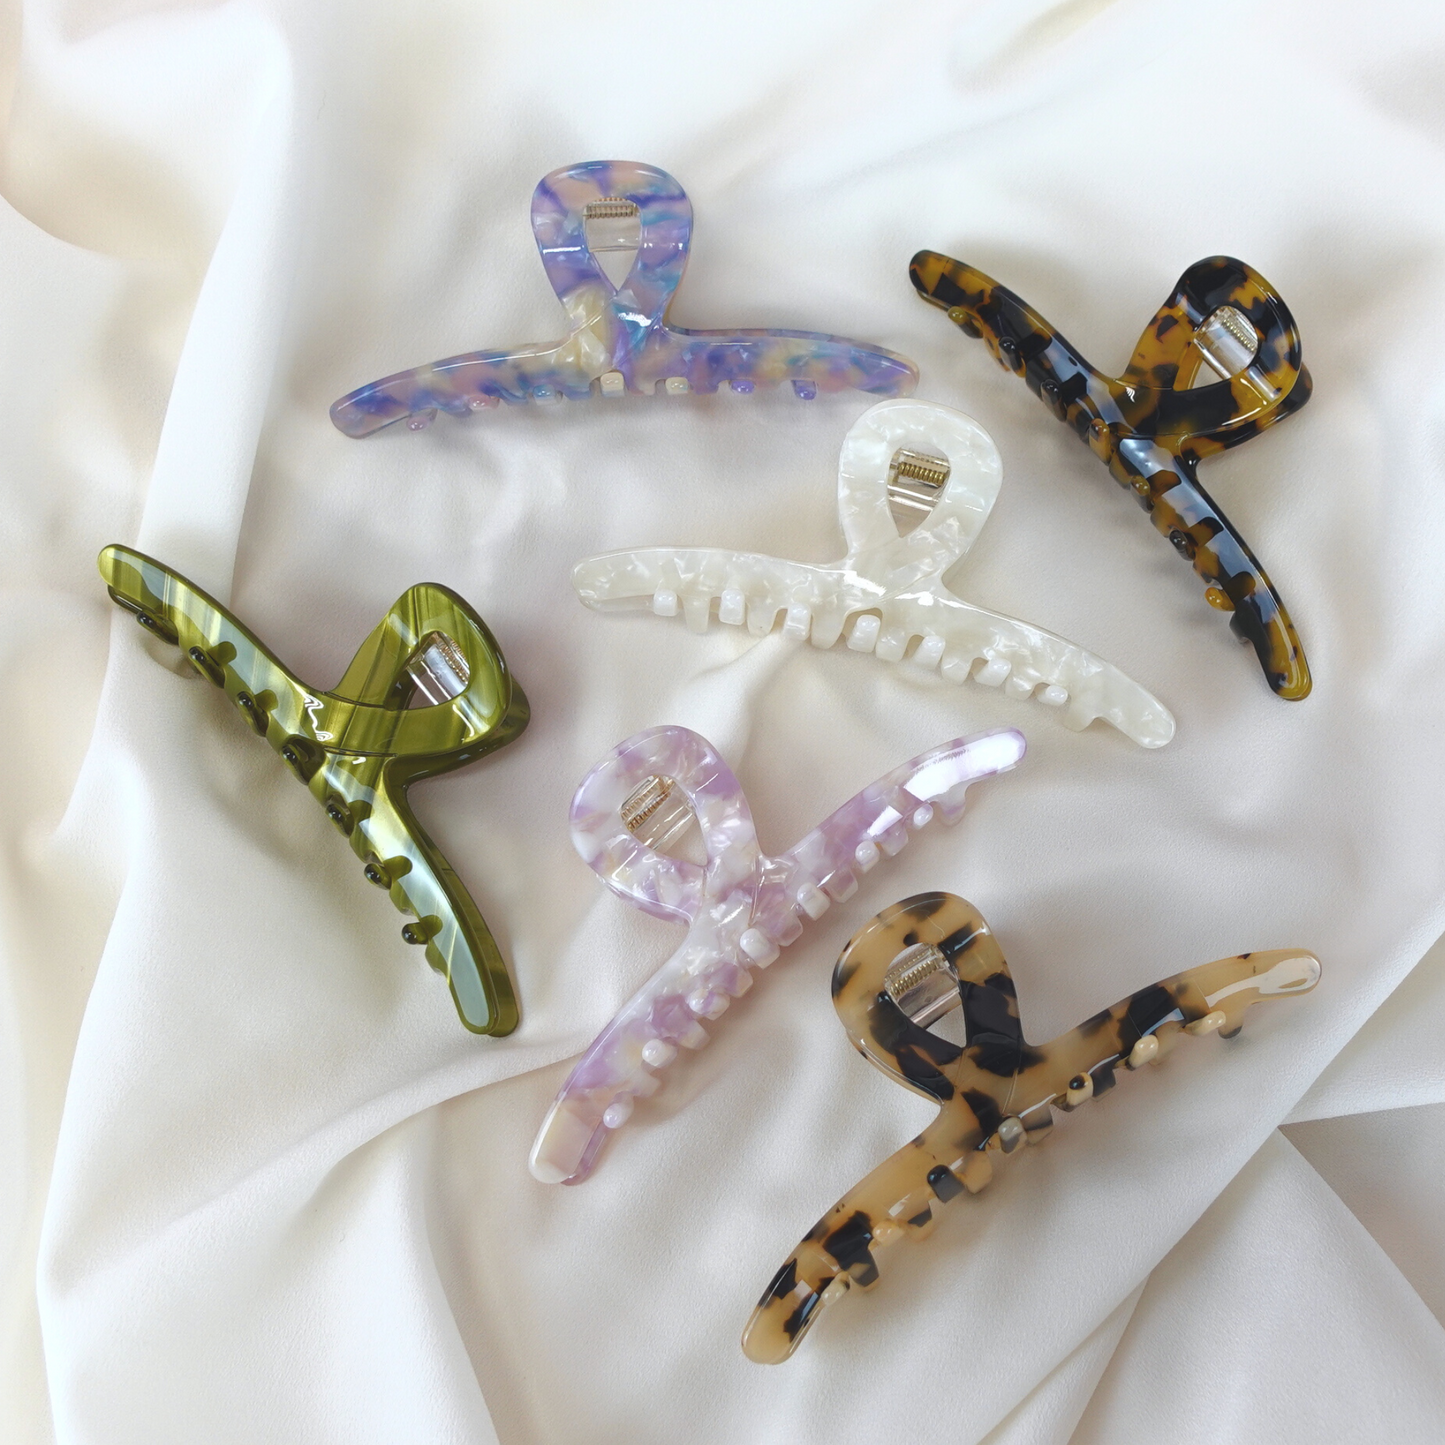 Joanna Cellulose Acetate Hair Claw Clips